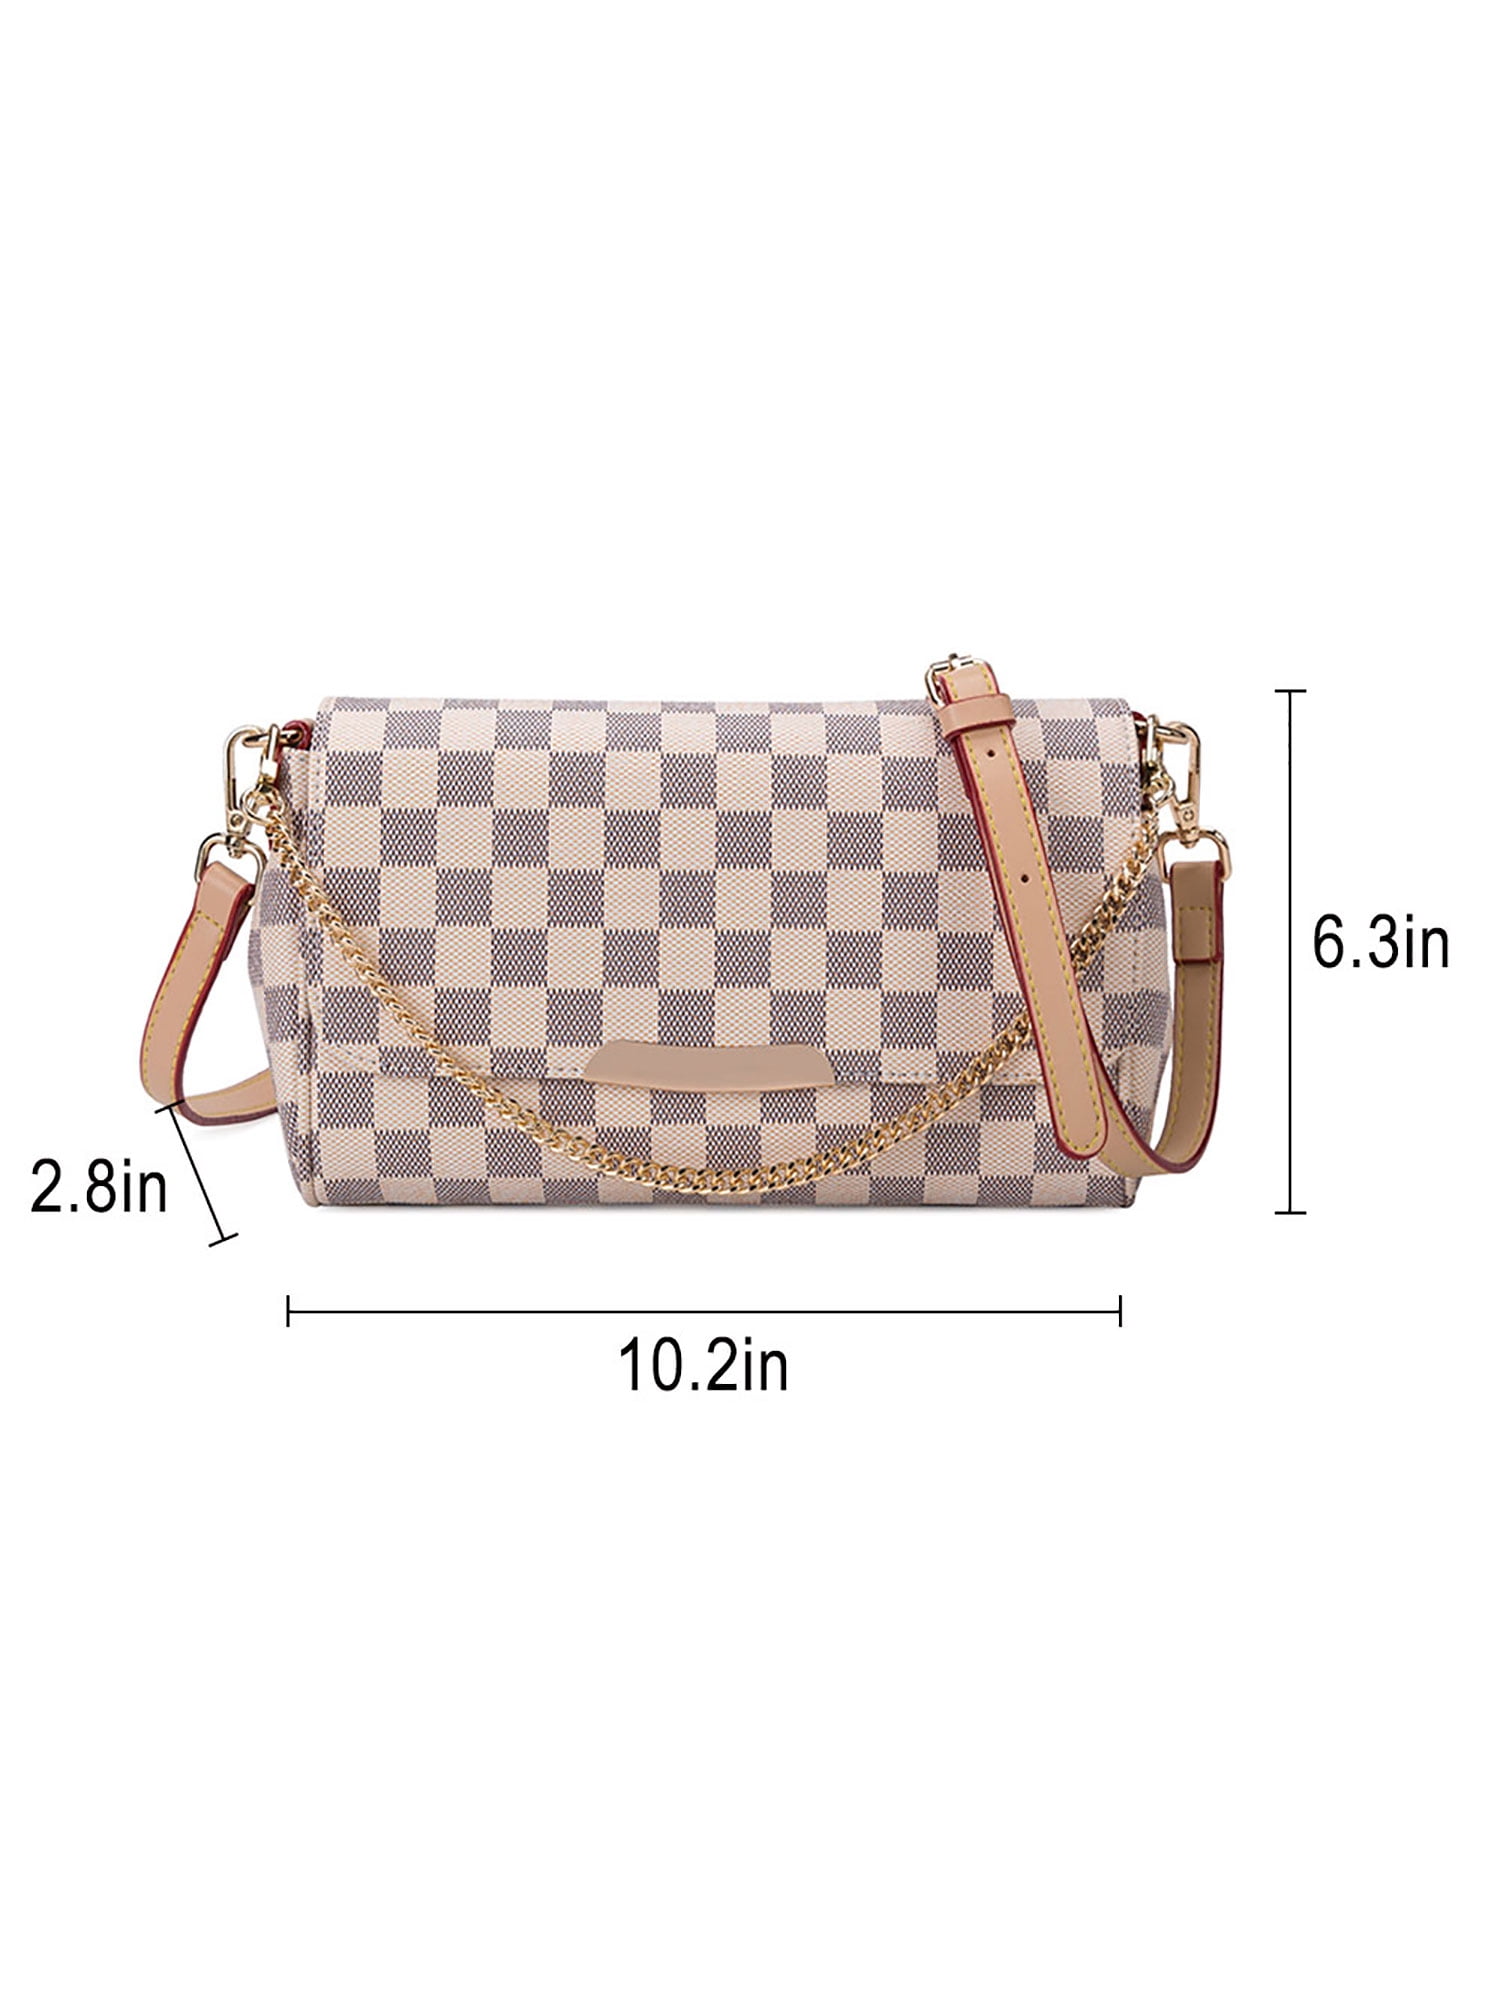 Sexy Dance 2Pcs Women School Backpack Purse Checkered Shoulder Handbag Chic  Tote Work Bag Anti-Theft Rucksack Daypack with Inner Pouch Wallet 